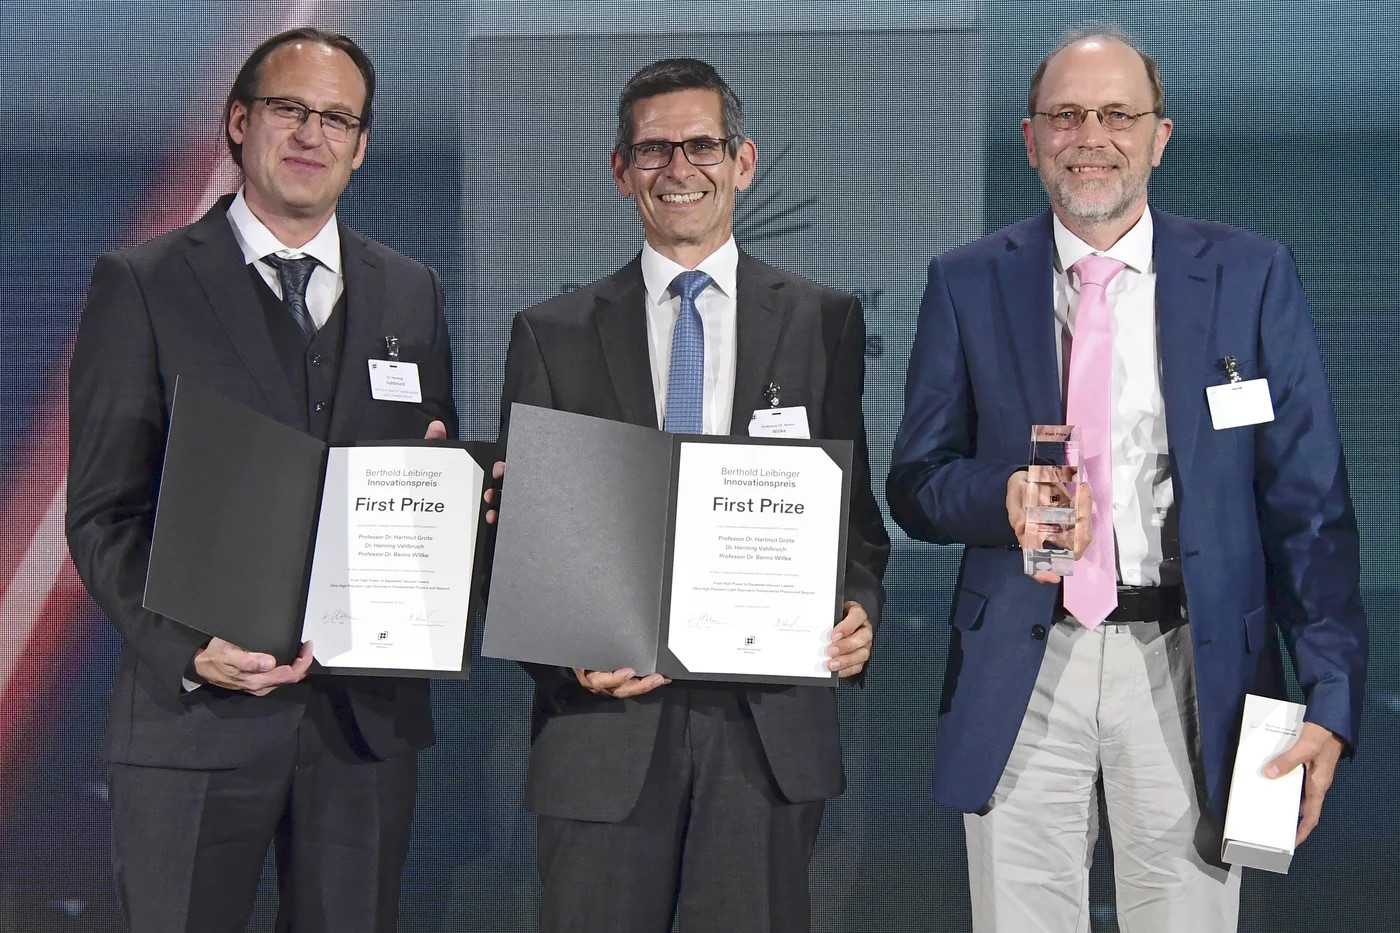 News-Image 9 of: Berthold Leibinger Stiftung honors laser researchers from Hannover and Cardiff